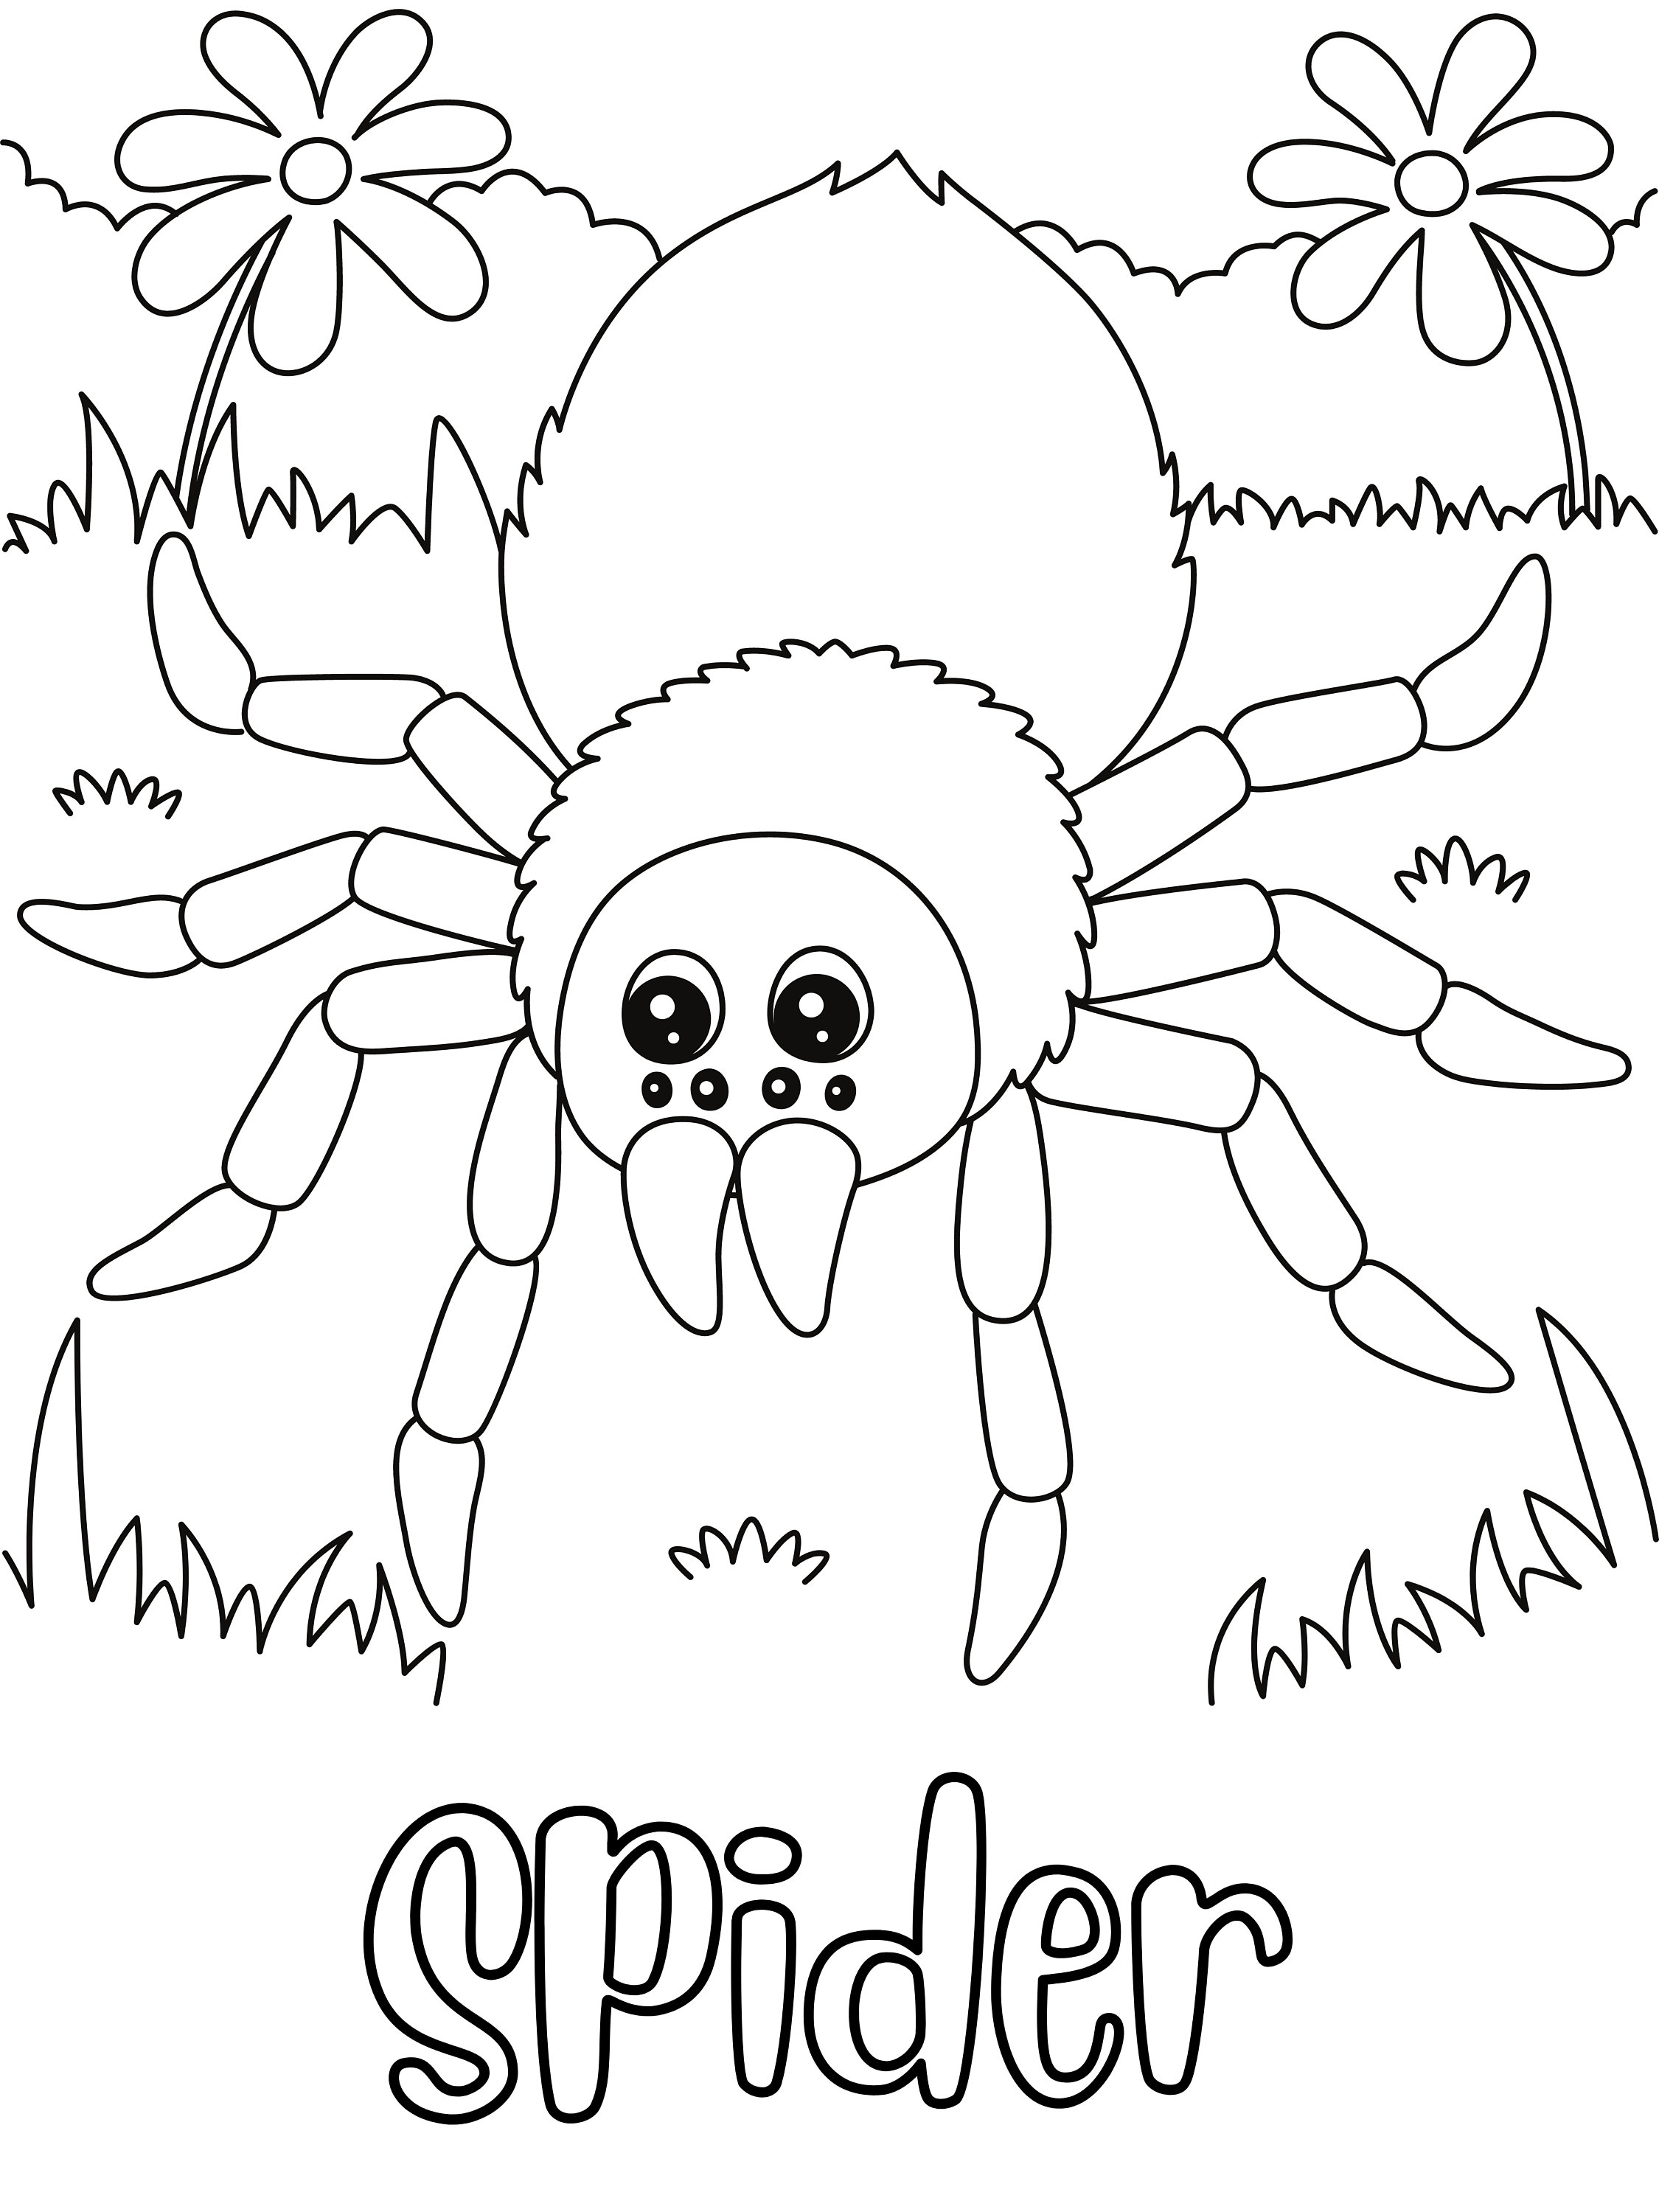 Spider coloring page digital download printable coloring page